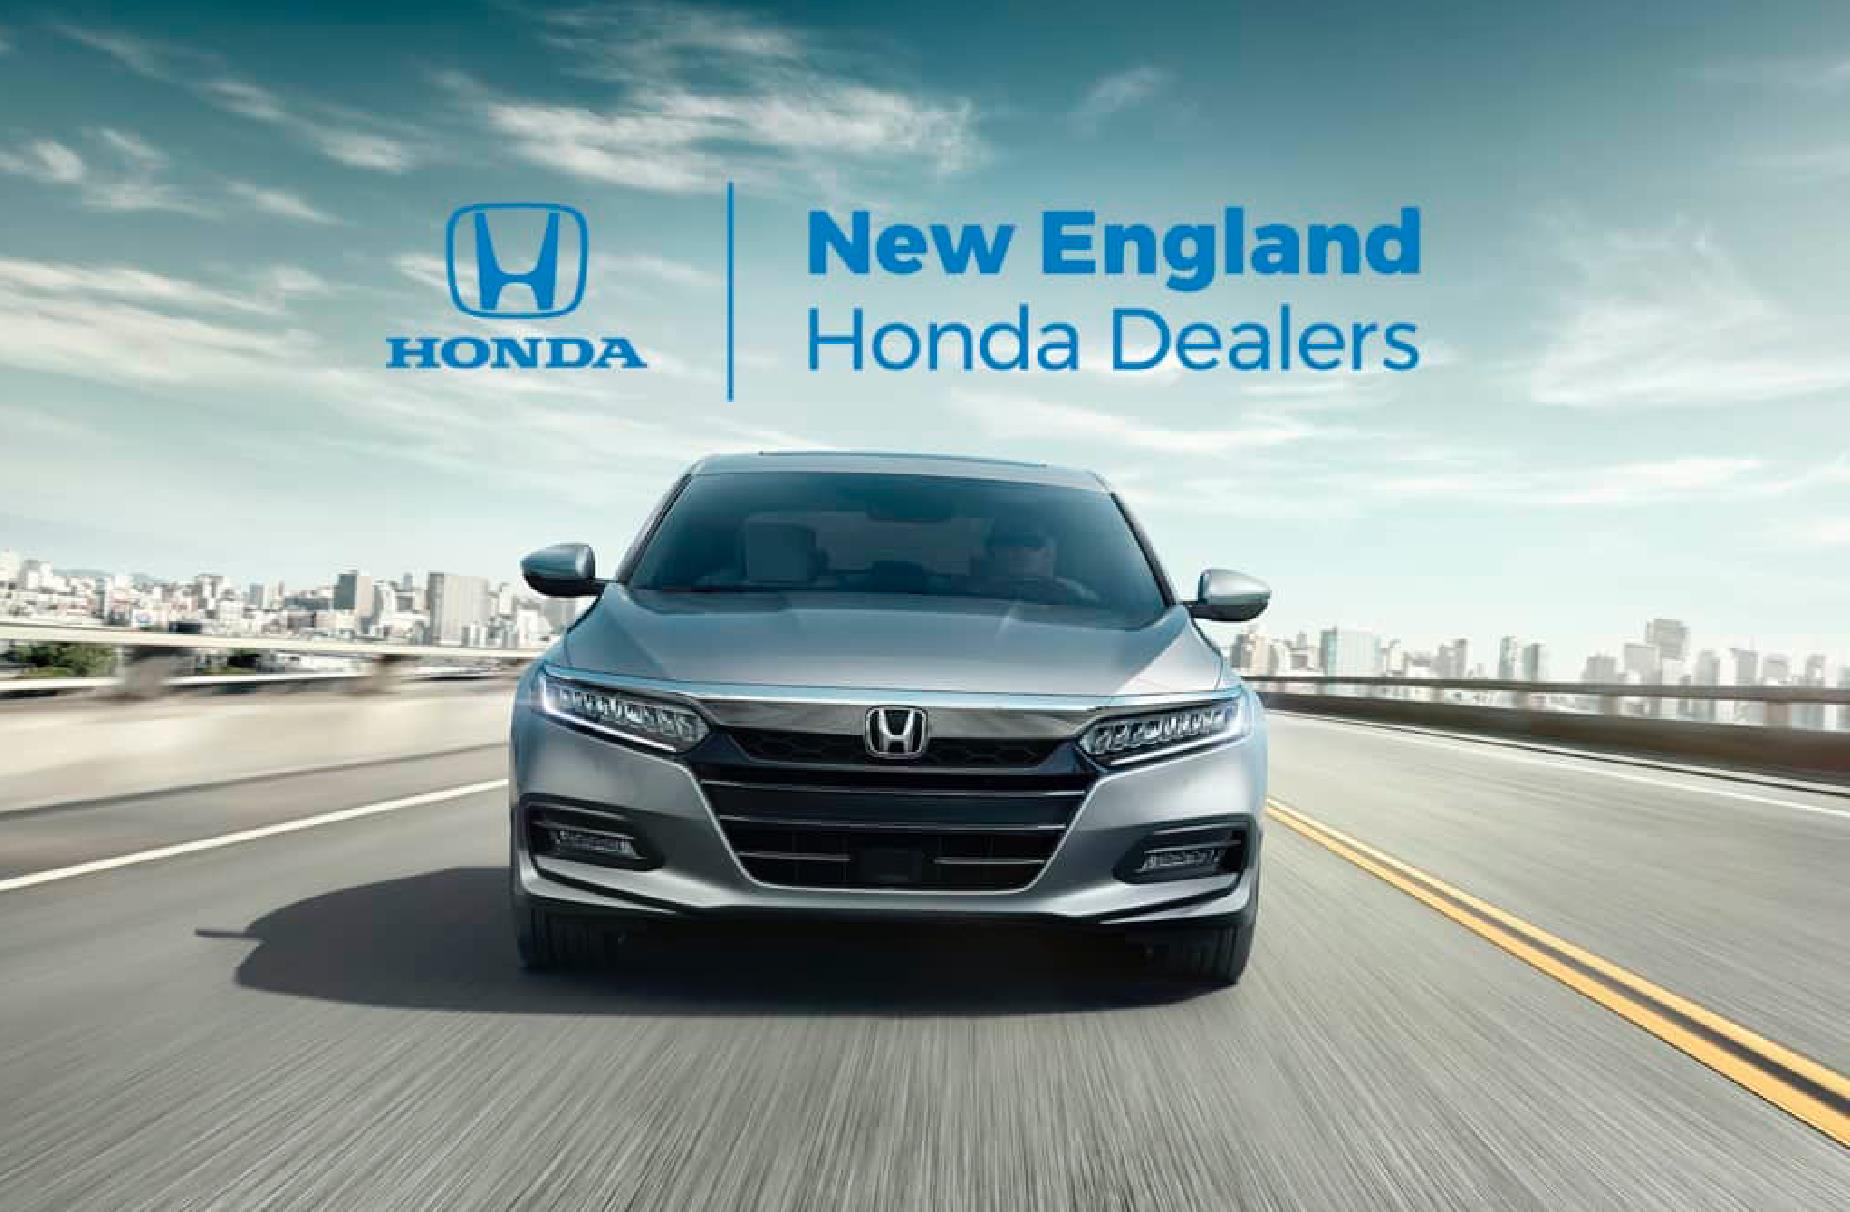 Putting the “New England” in New England Honda | Full Contact Advertising